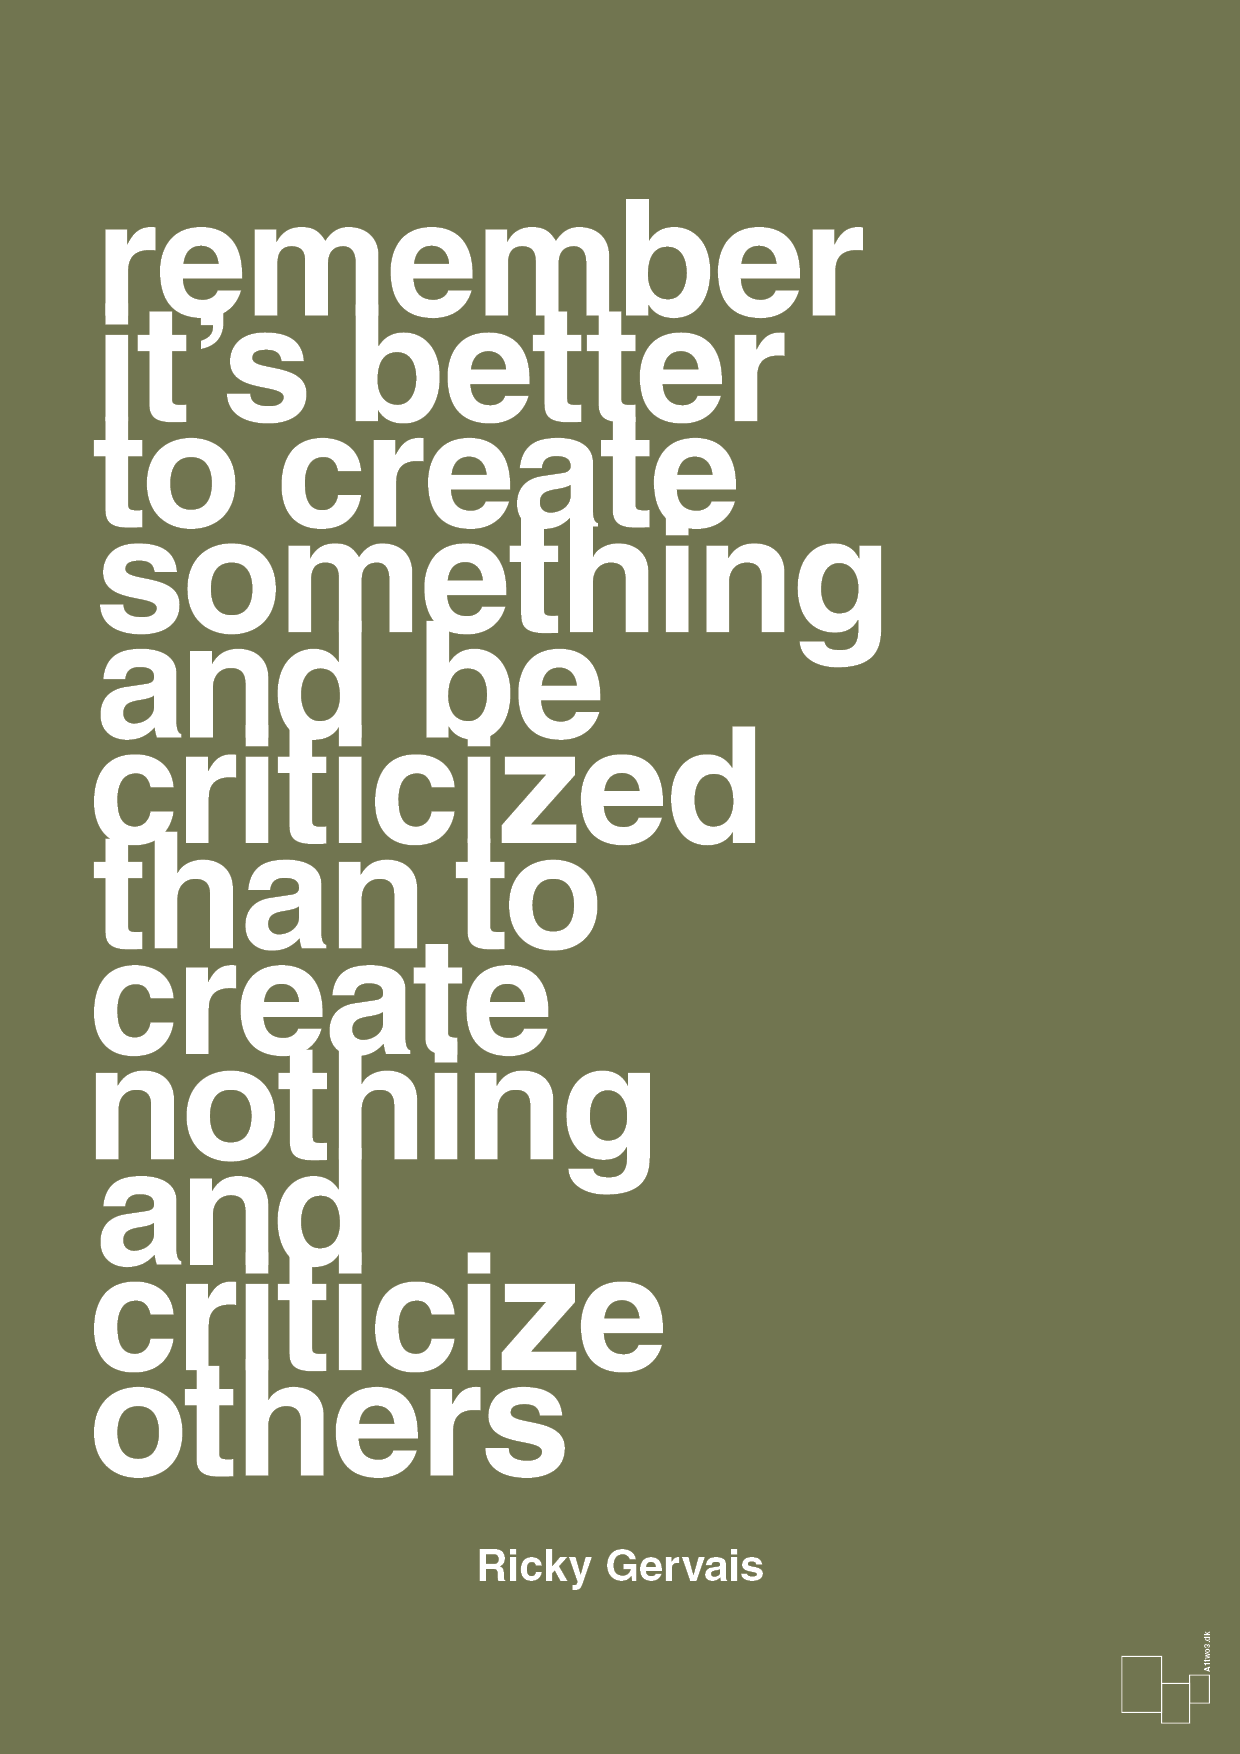 remember its better to create something and be criticized than create nothing and criticize others - Plakat med Citater i Secret Meadow